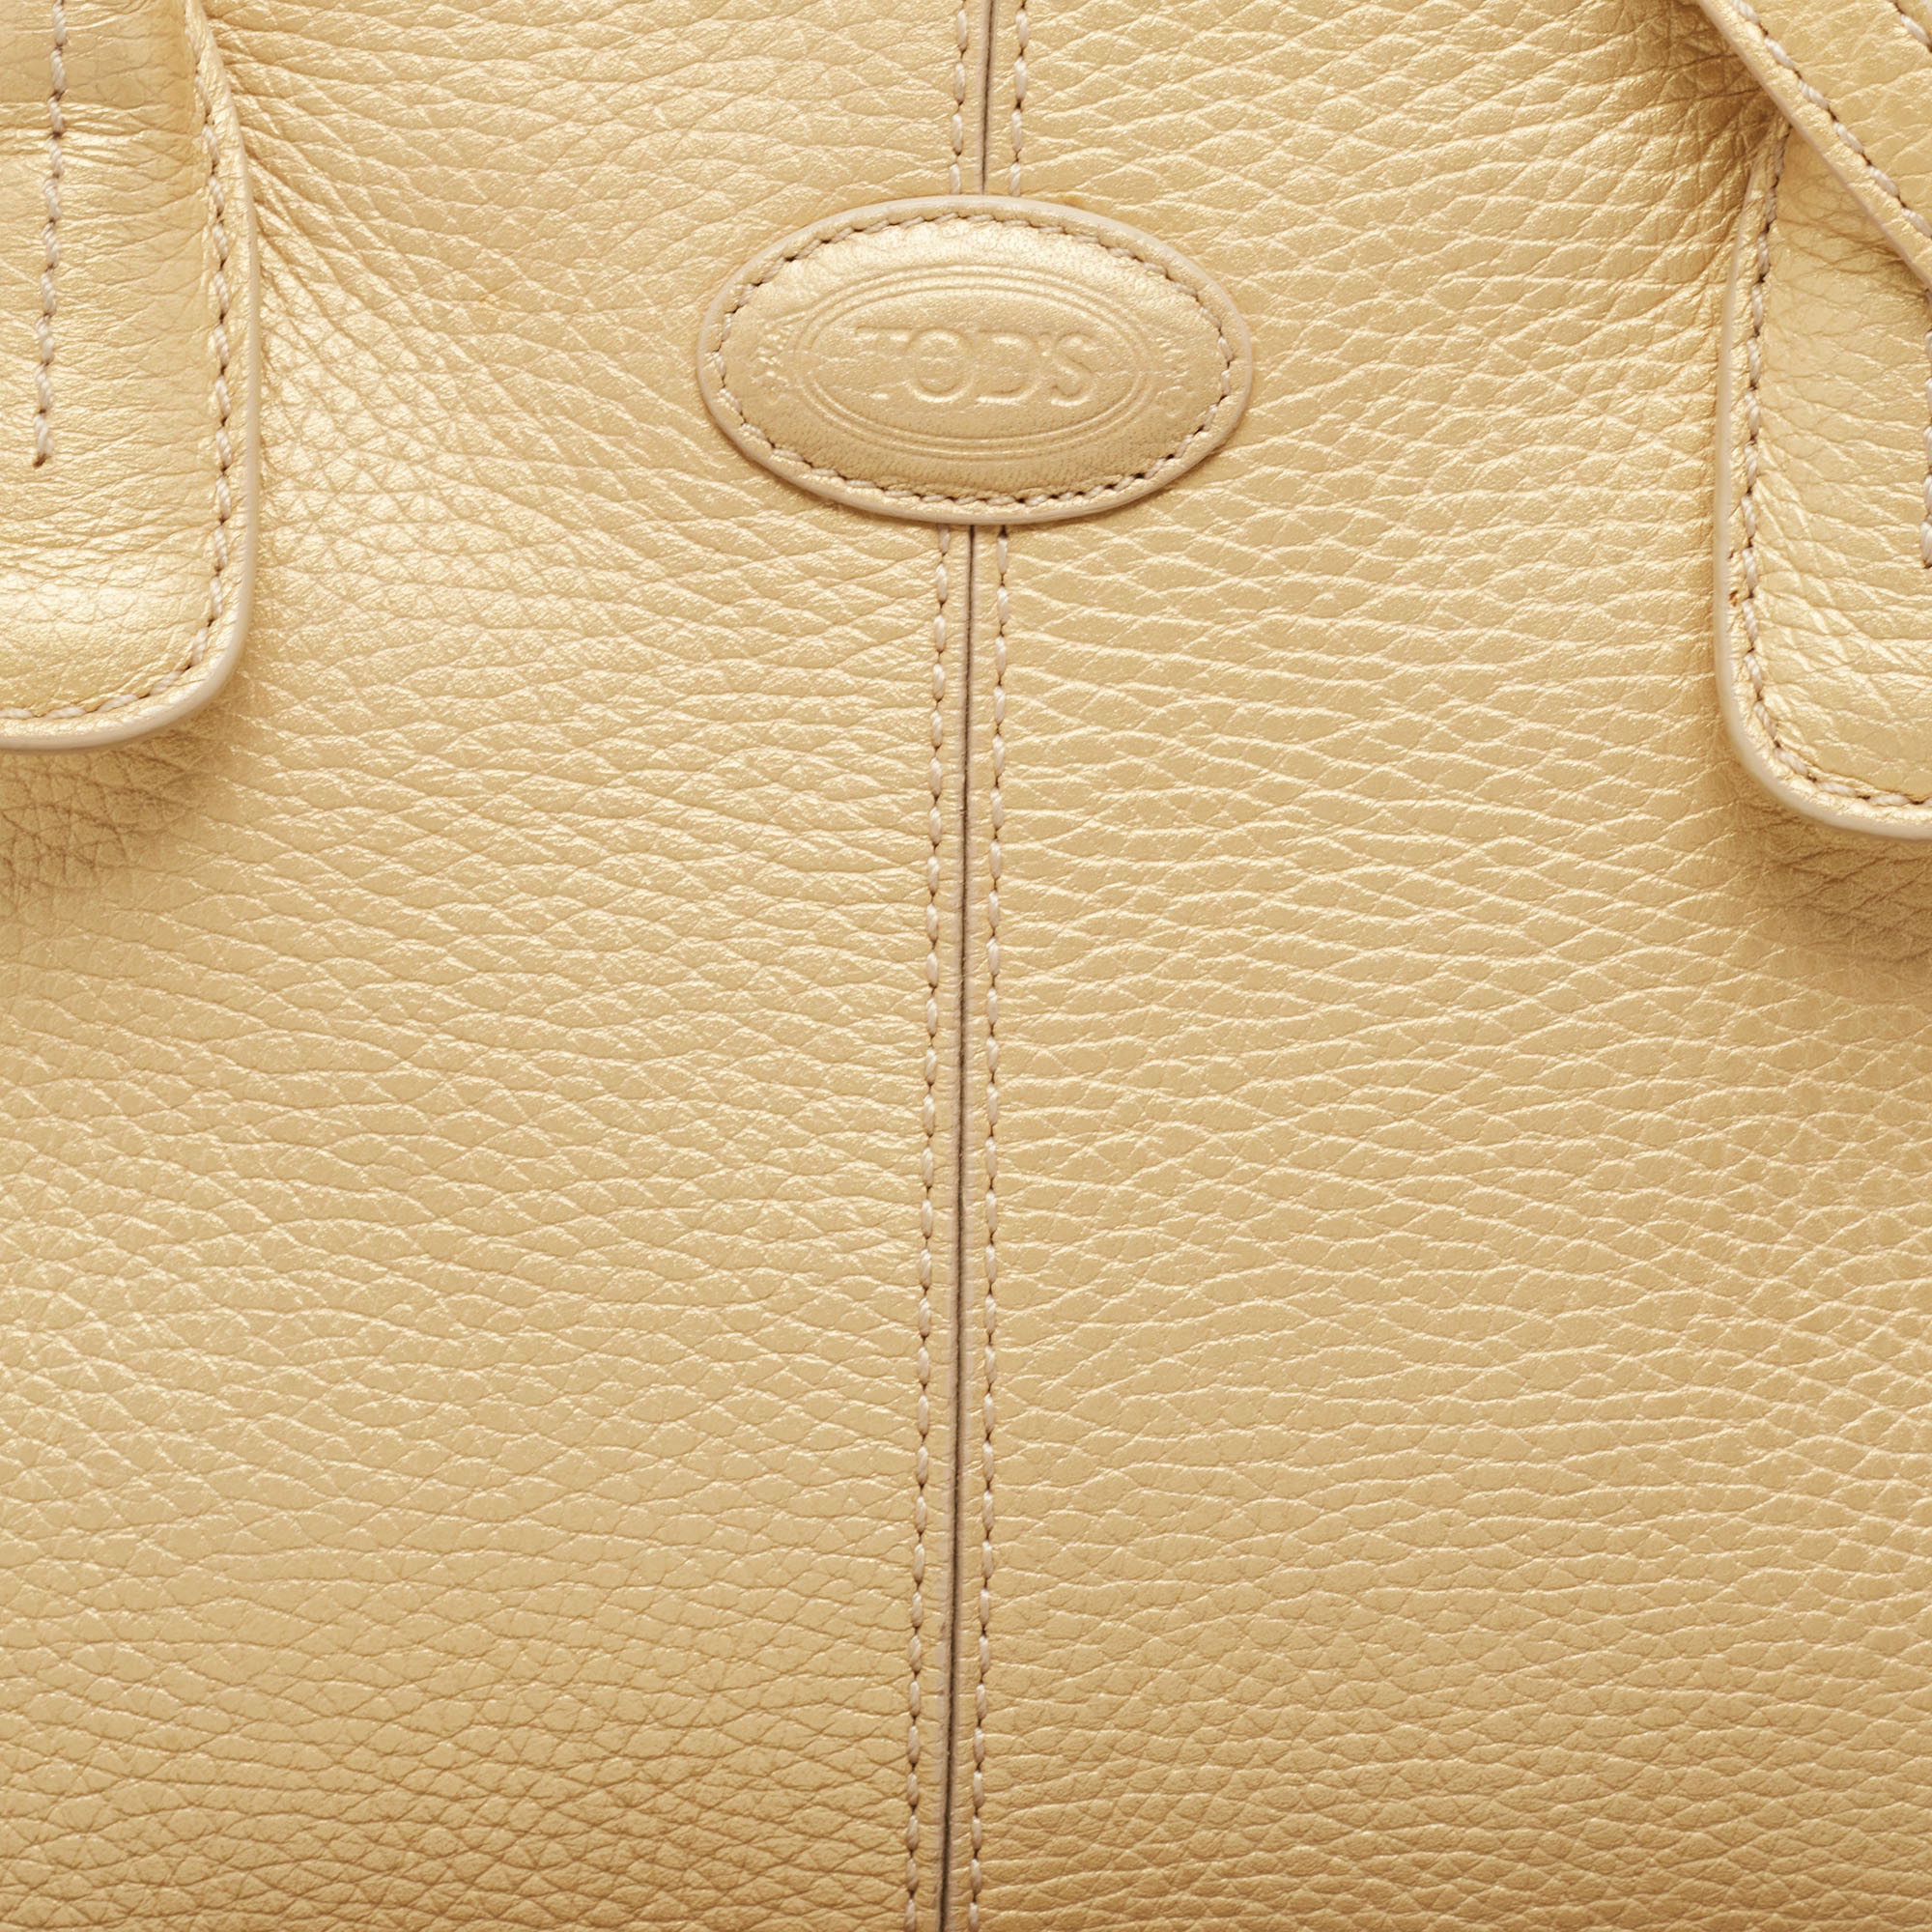 Tod's Gold Leather East/West New Girelli Satchel